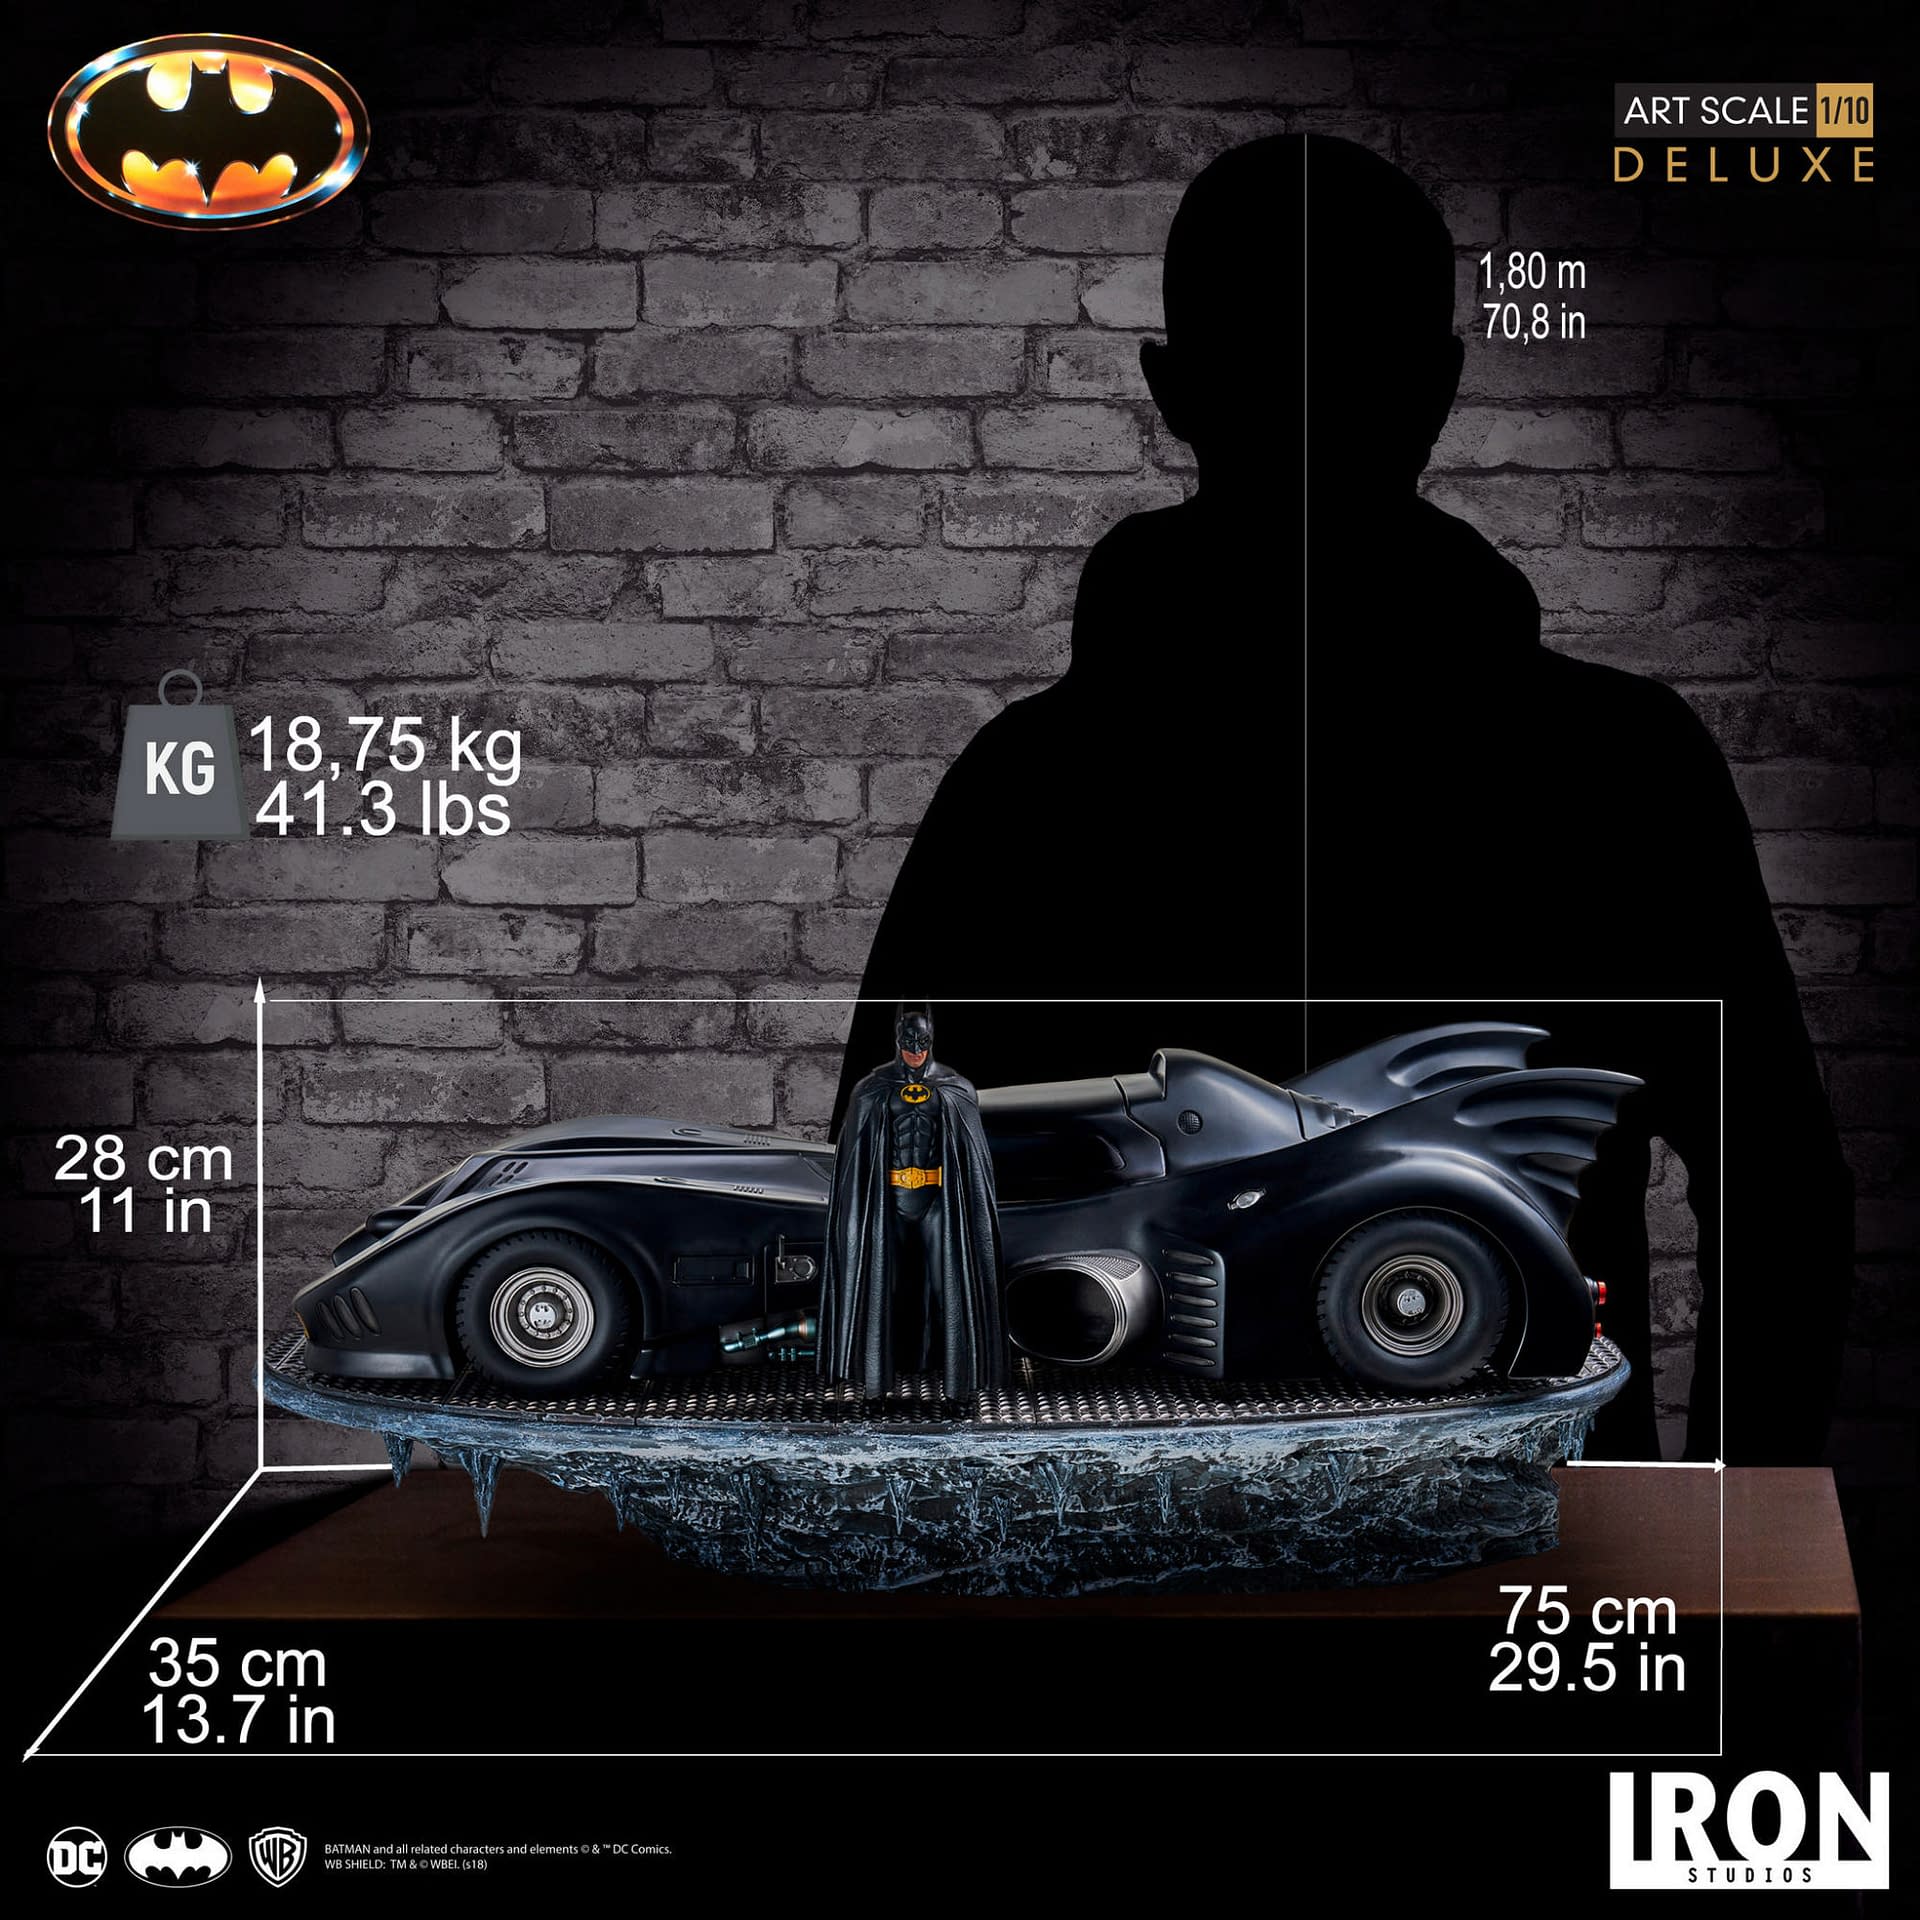 Batmobile 89 Hits the Streets Again With New Iron Studios Art Scale